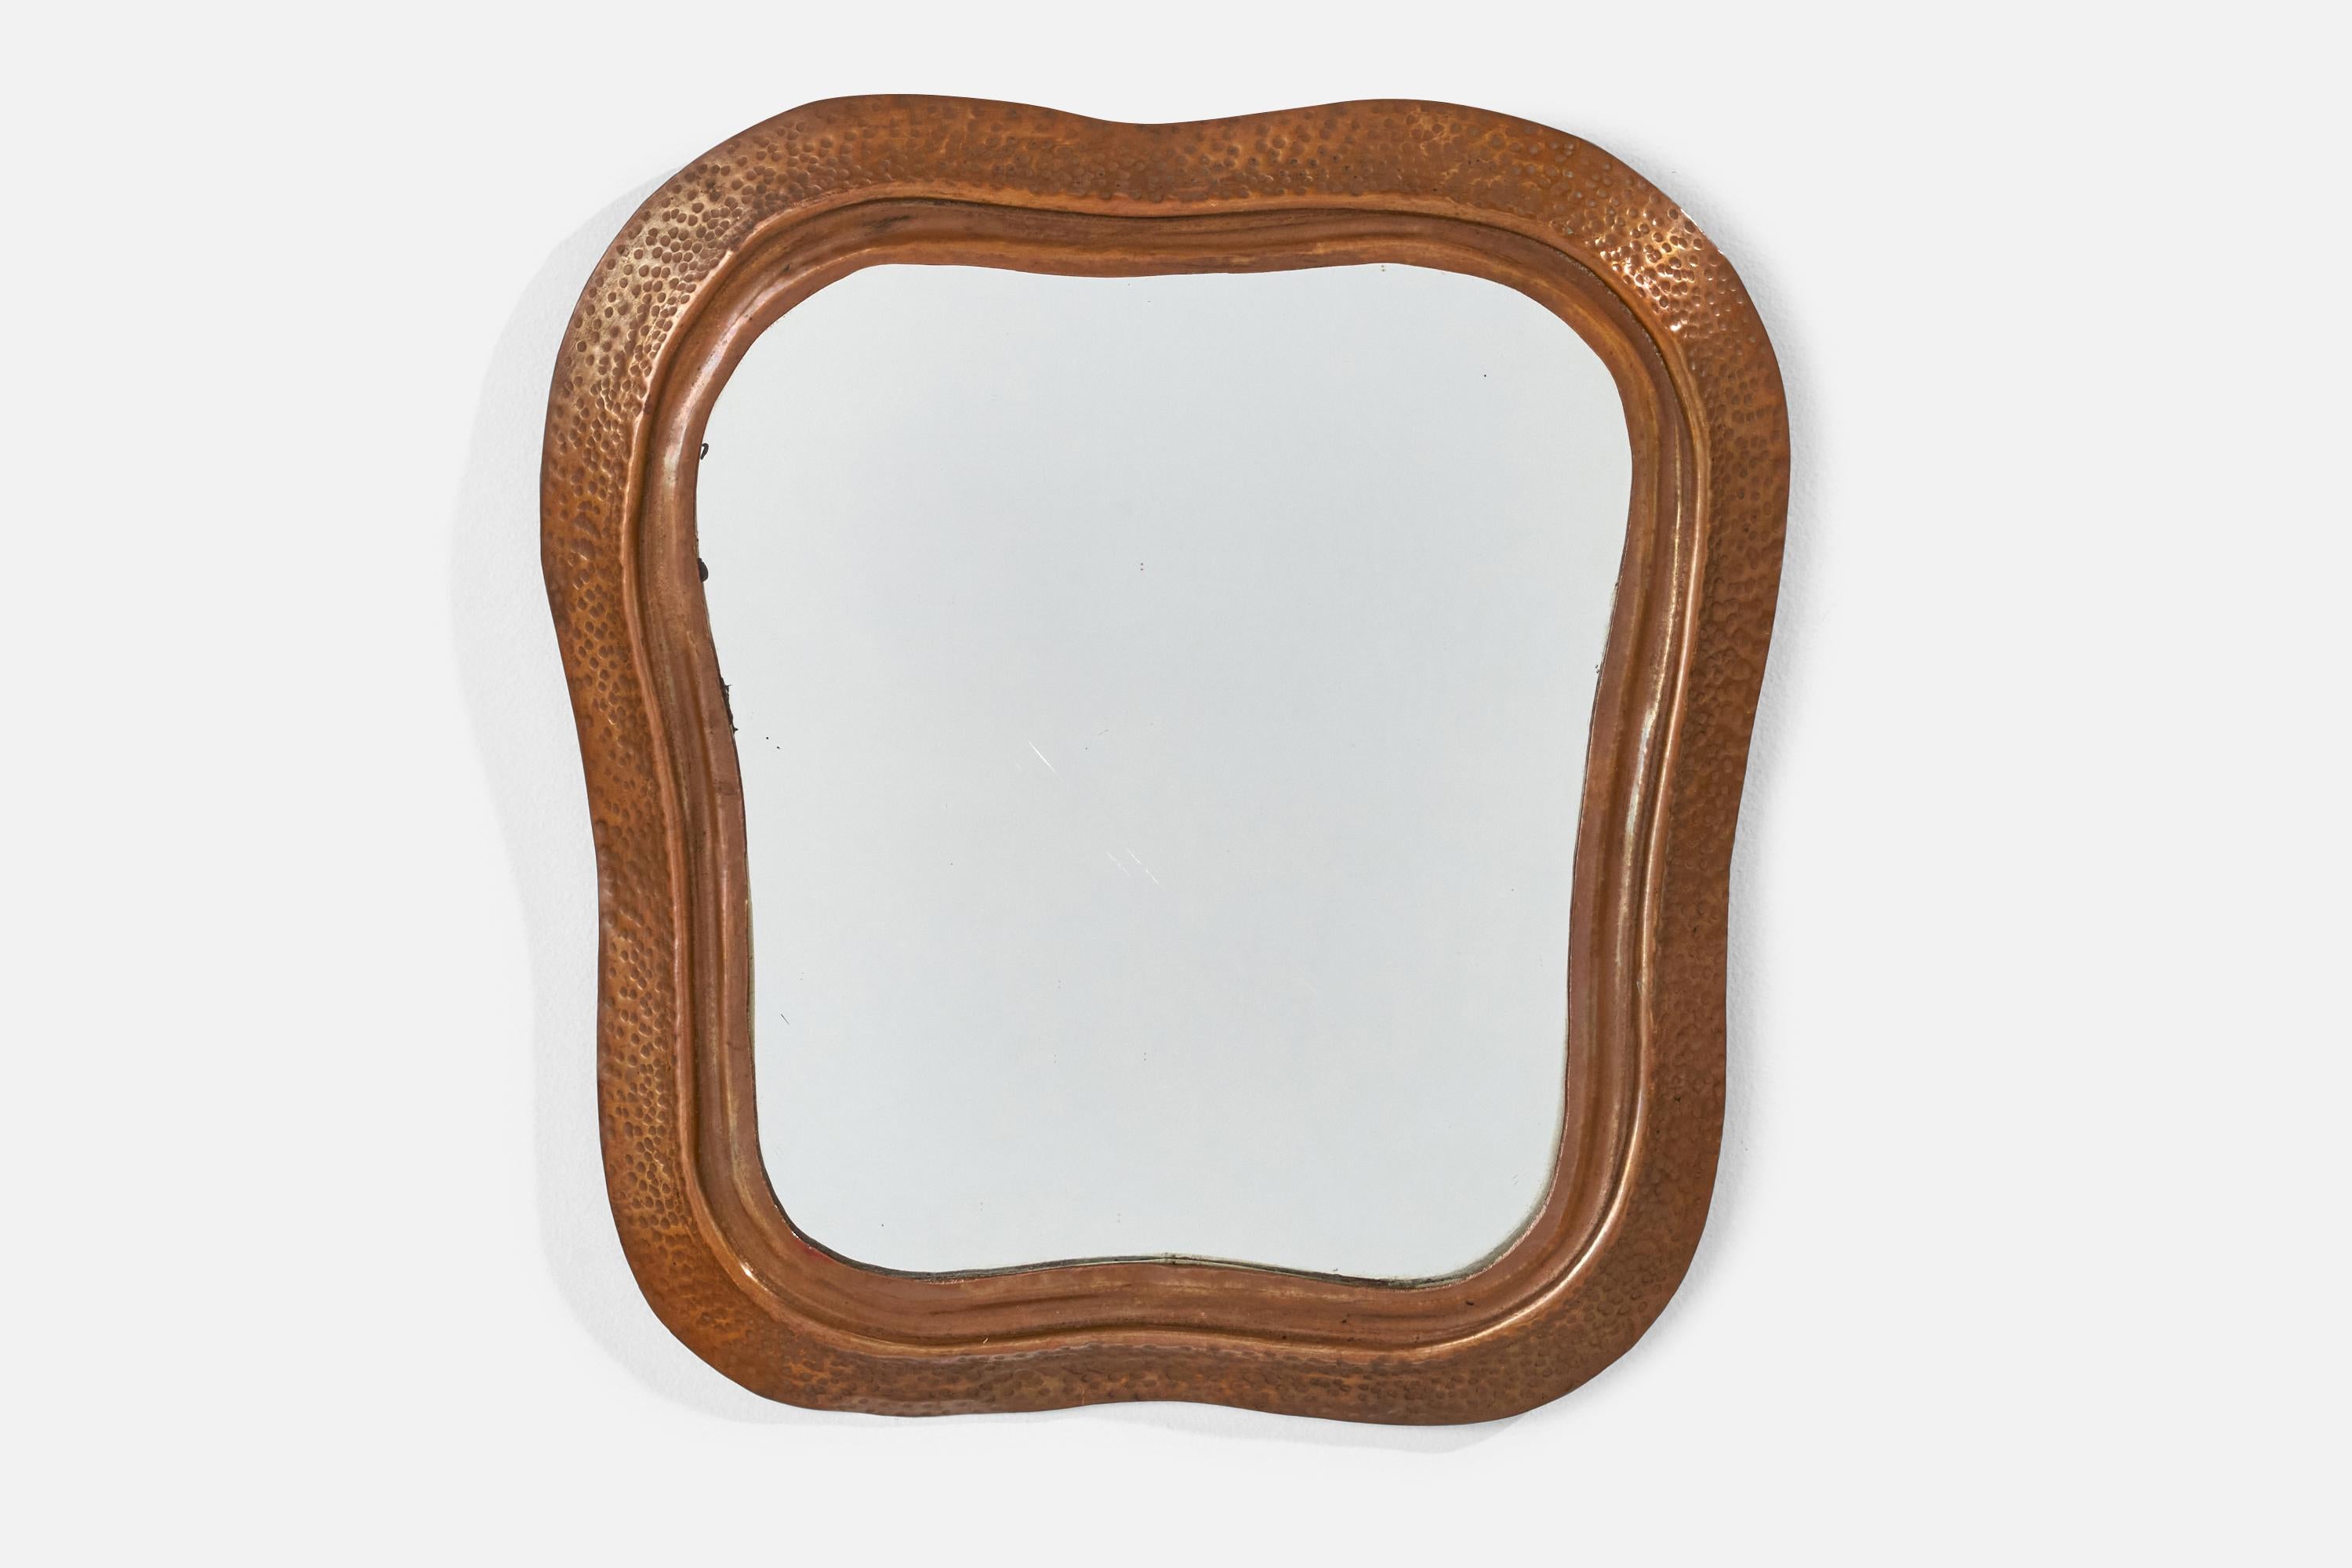 A hammered copper wall mirror designed and produced in Italy, 1940s.